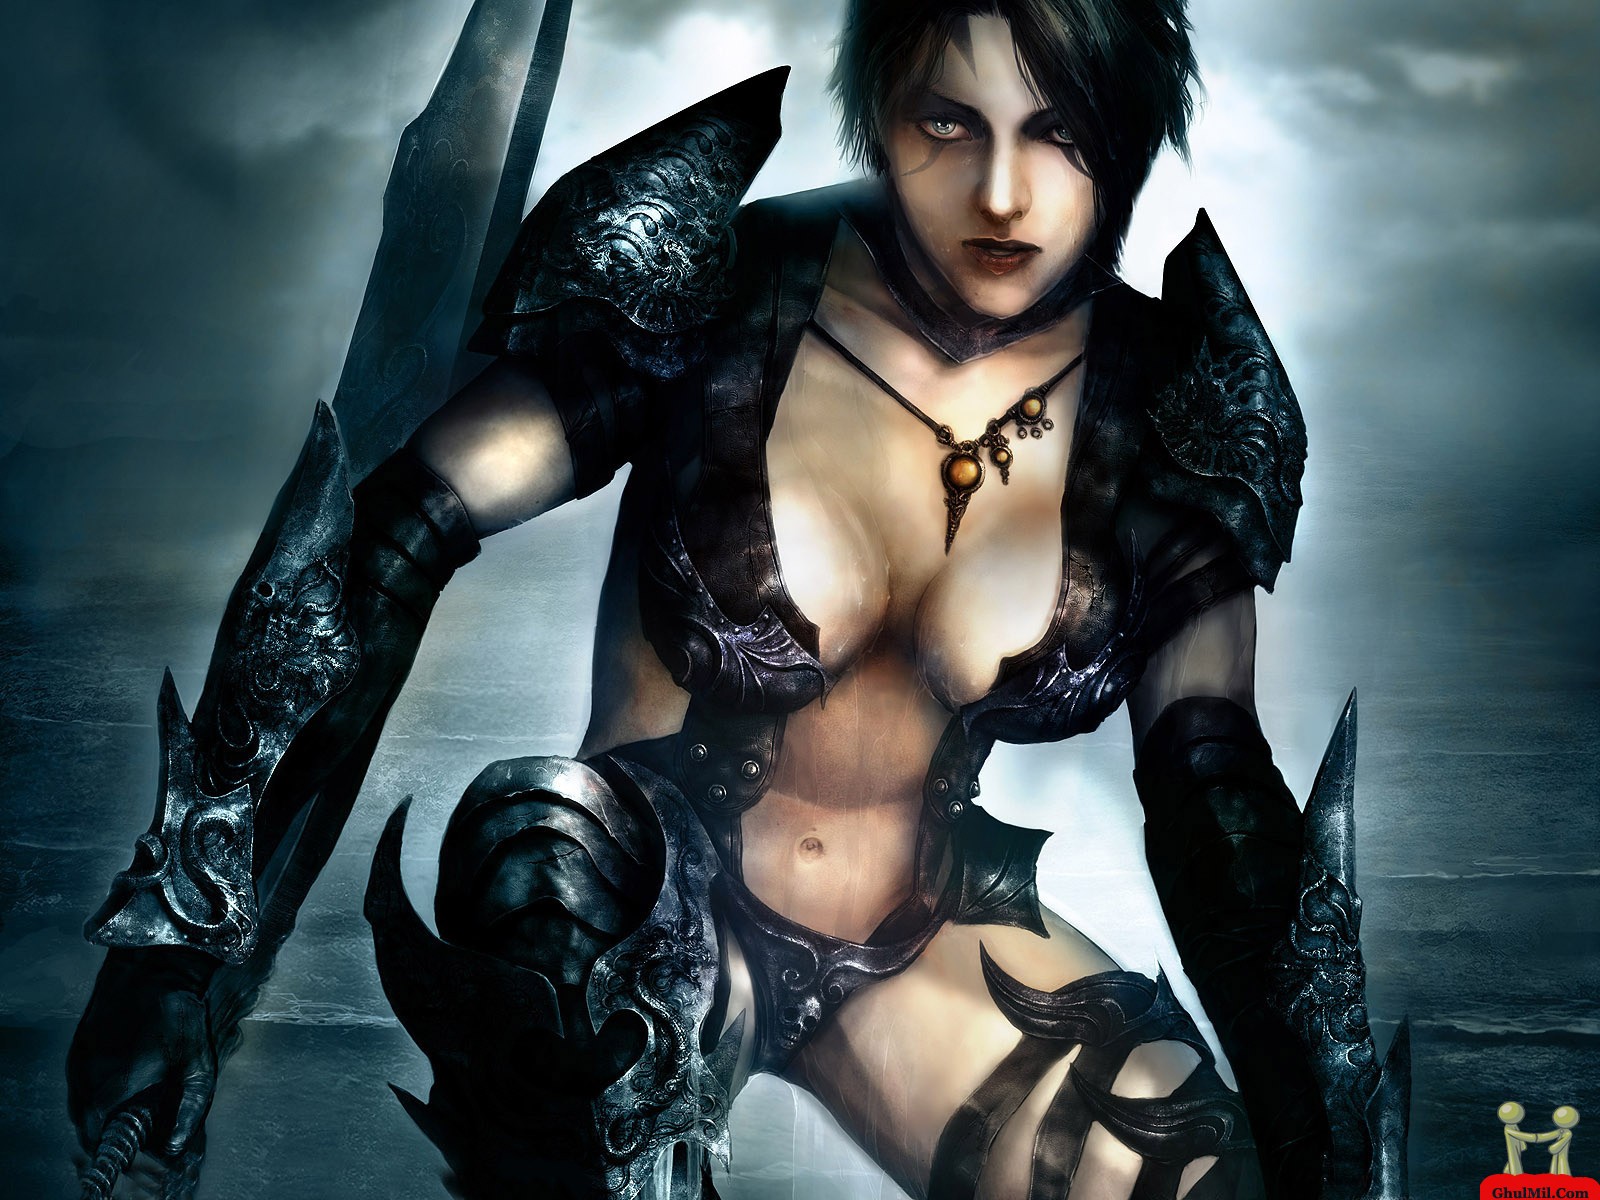 3d Girl Wallpaper For Computer - Prince Of Persia Woman - 1600x1200  Wallpaper 